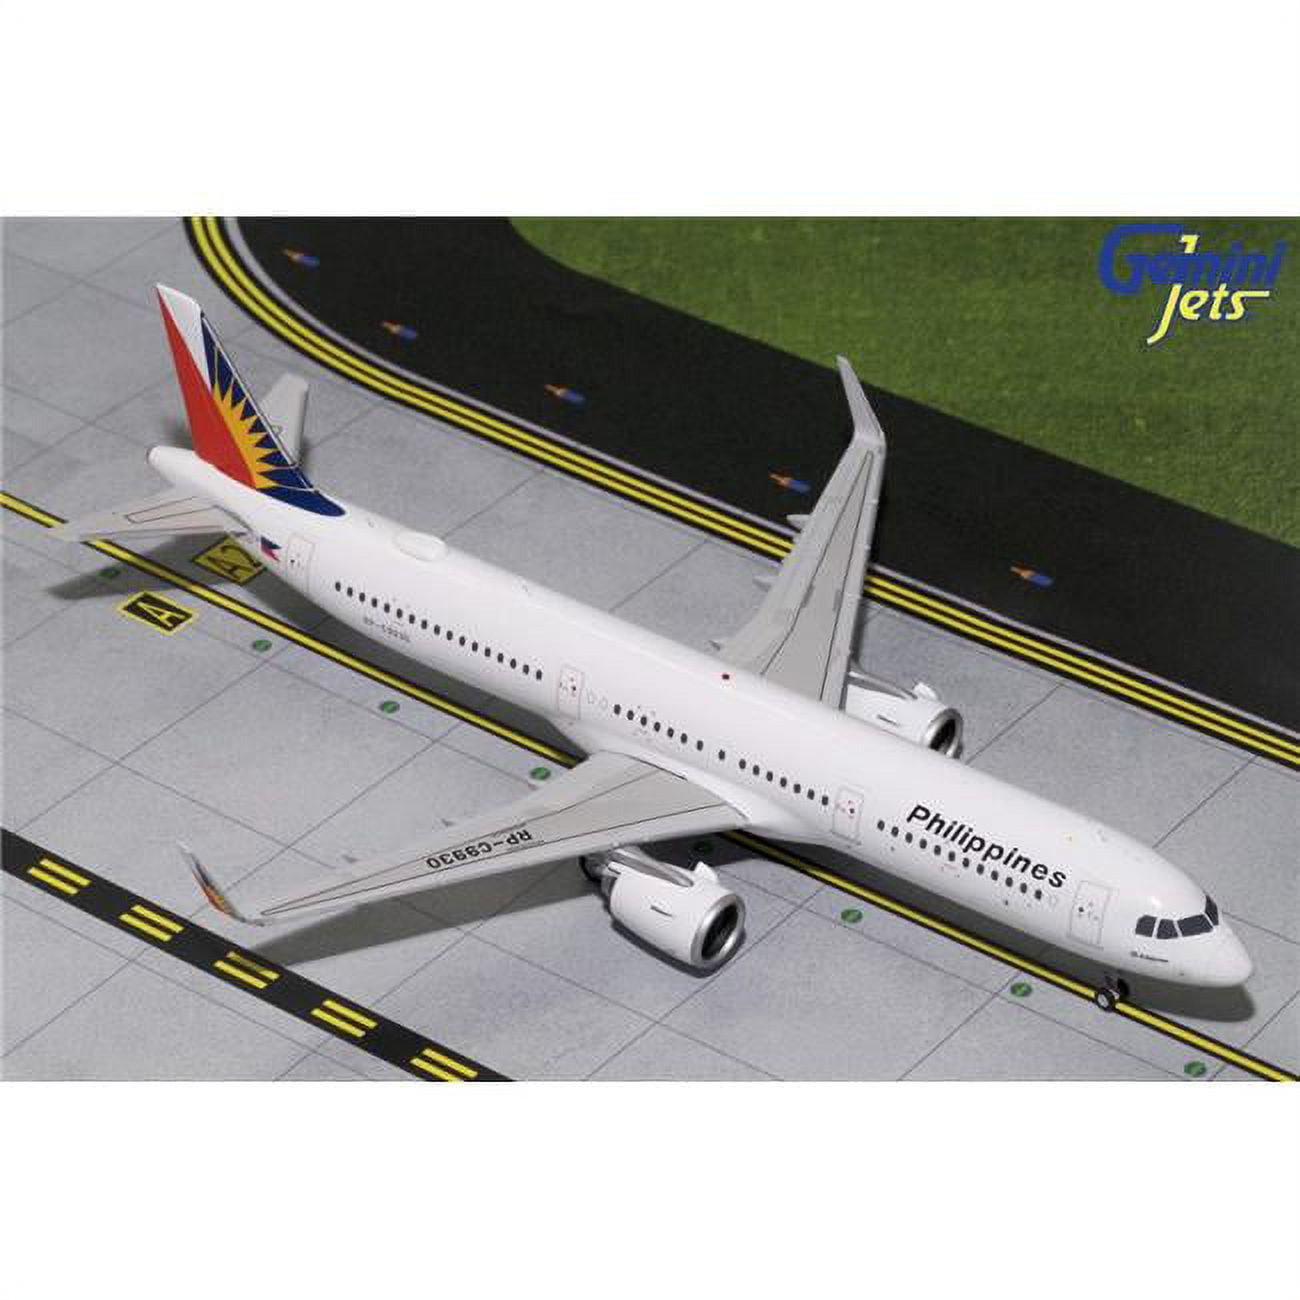 Gemini200 G2pal788 Philippine Airbus A321neo Scale 1 By 200 Scale Diecast Model Airplane Reg No. Rp-c9930